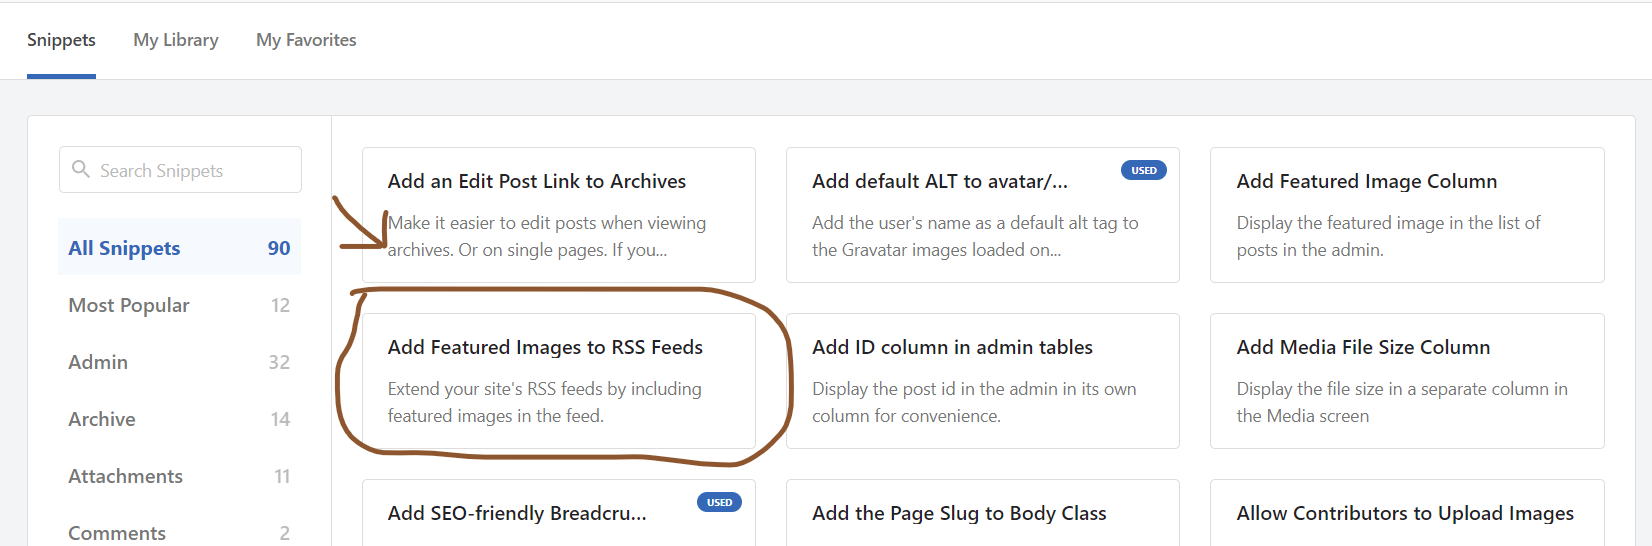 add featured images to rss feeds